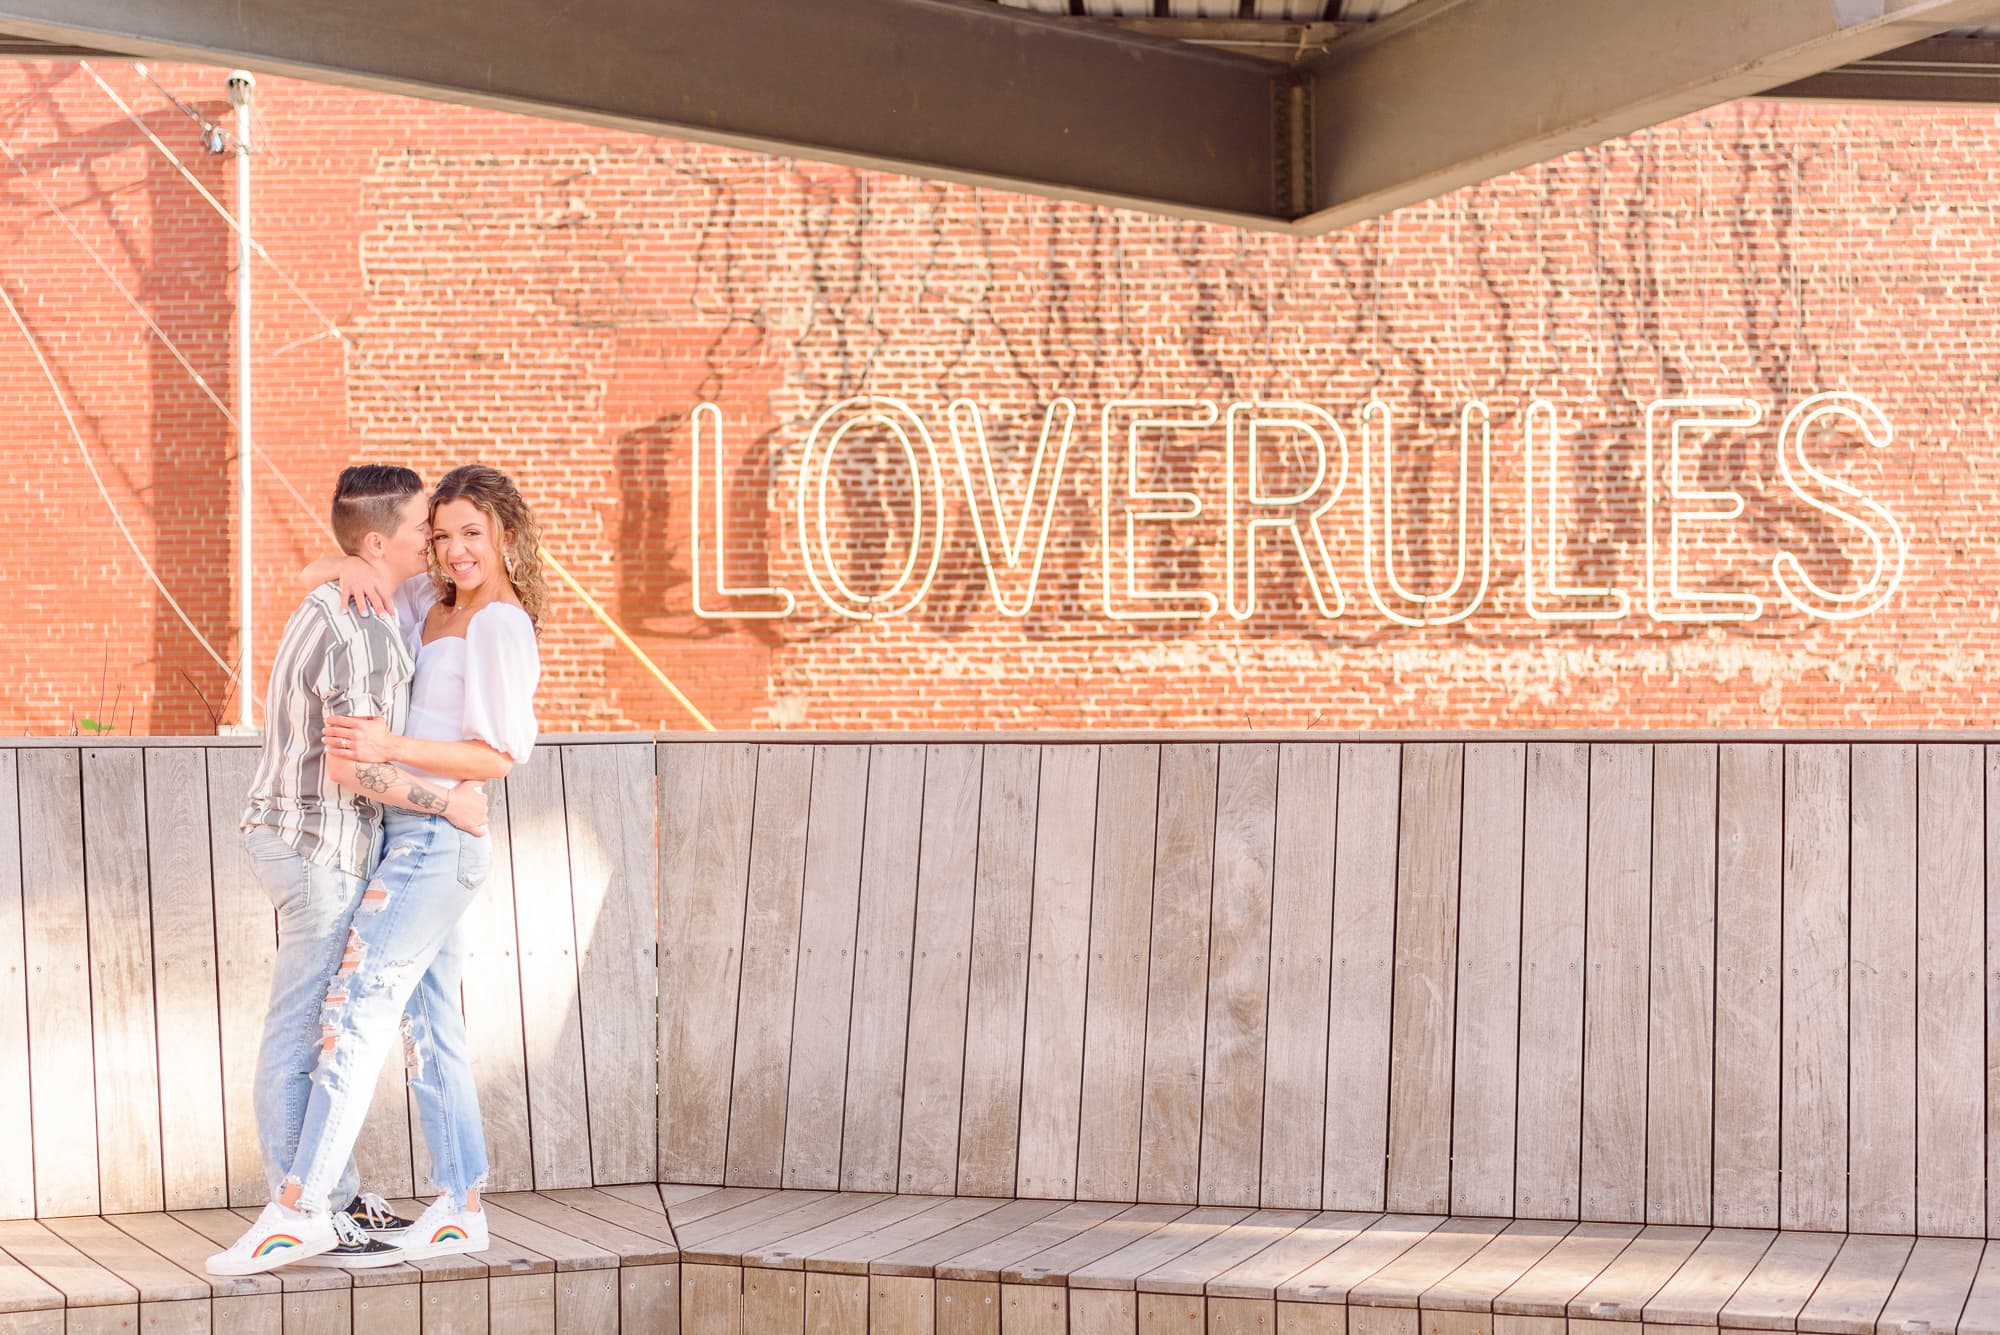 A lesbian couple takes their spring engagement photos in front of a sign that says "Love Rules".